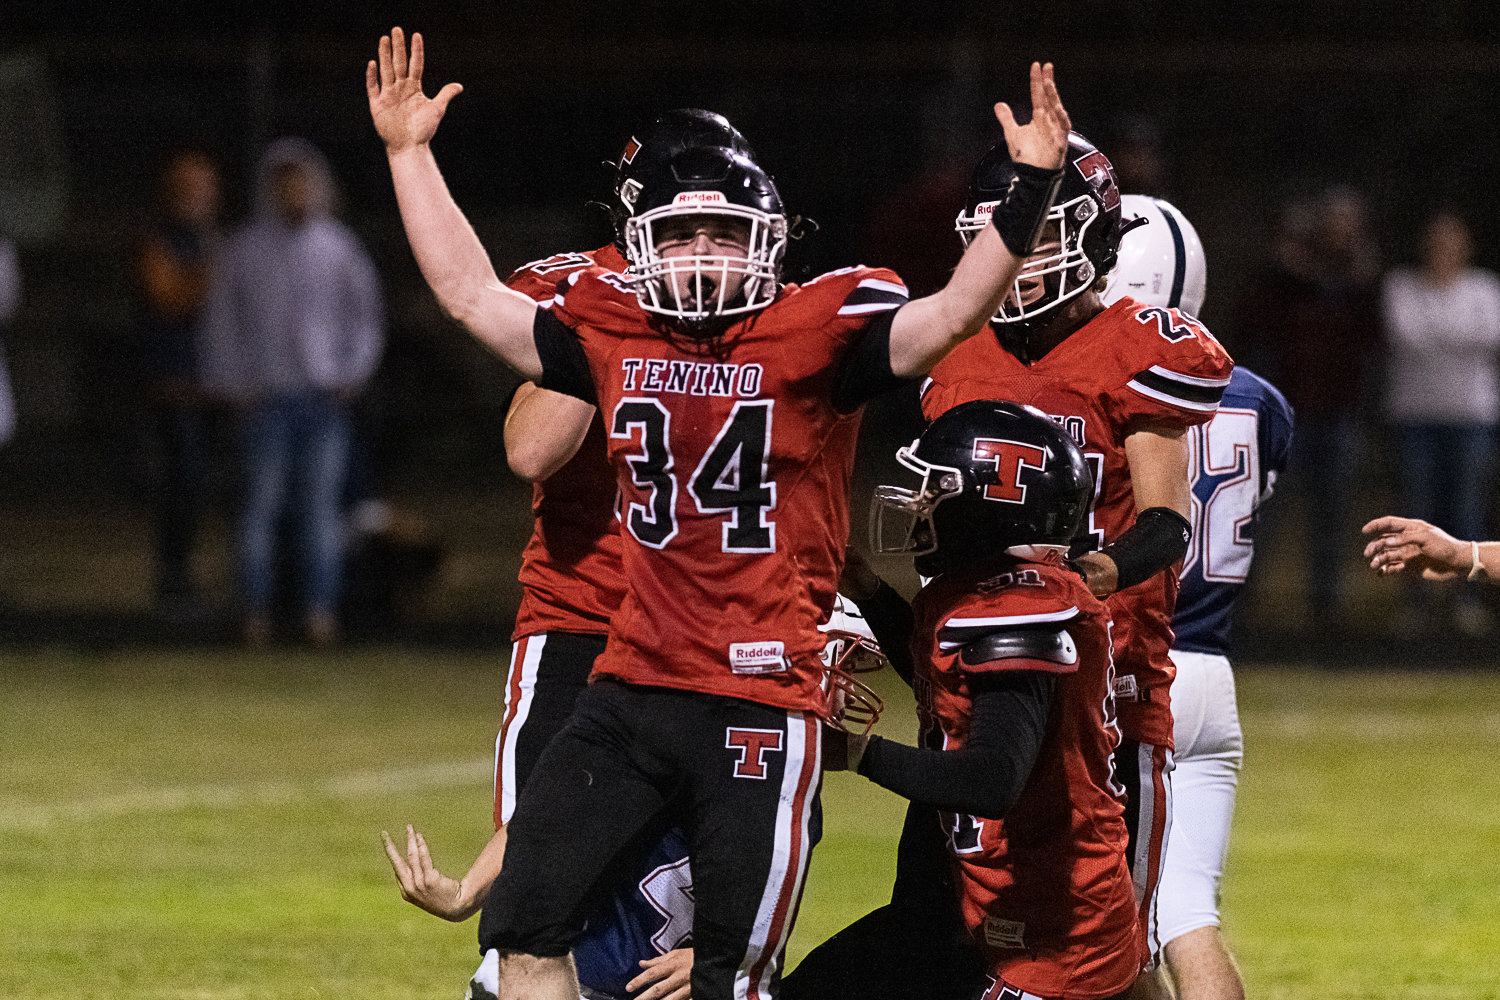 Tenino tailback Randy Marti celebrates after a two-point conversion attempt against PWV Sept. 2.